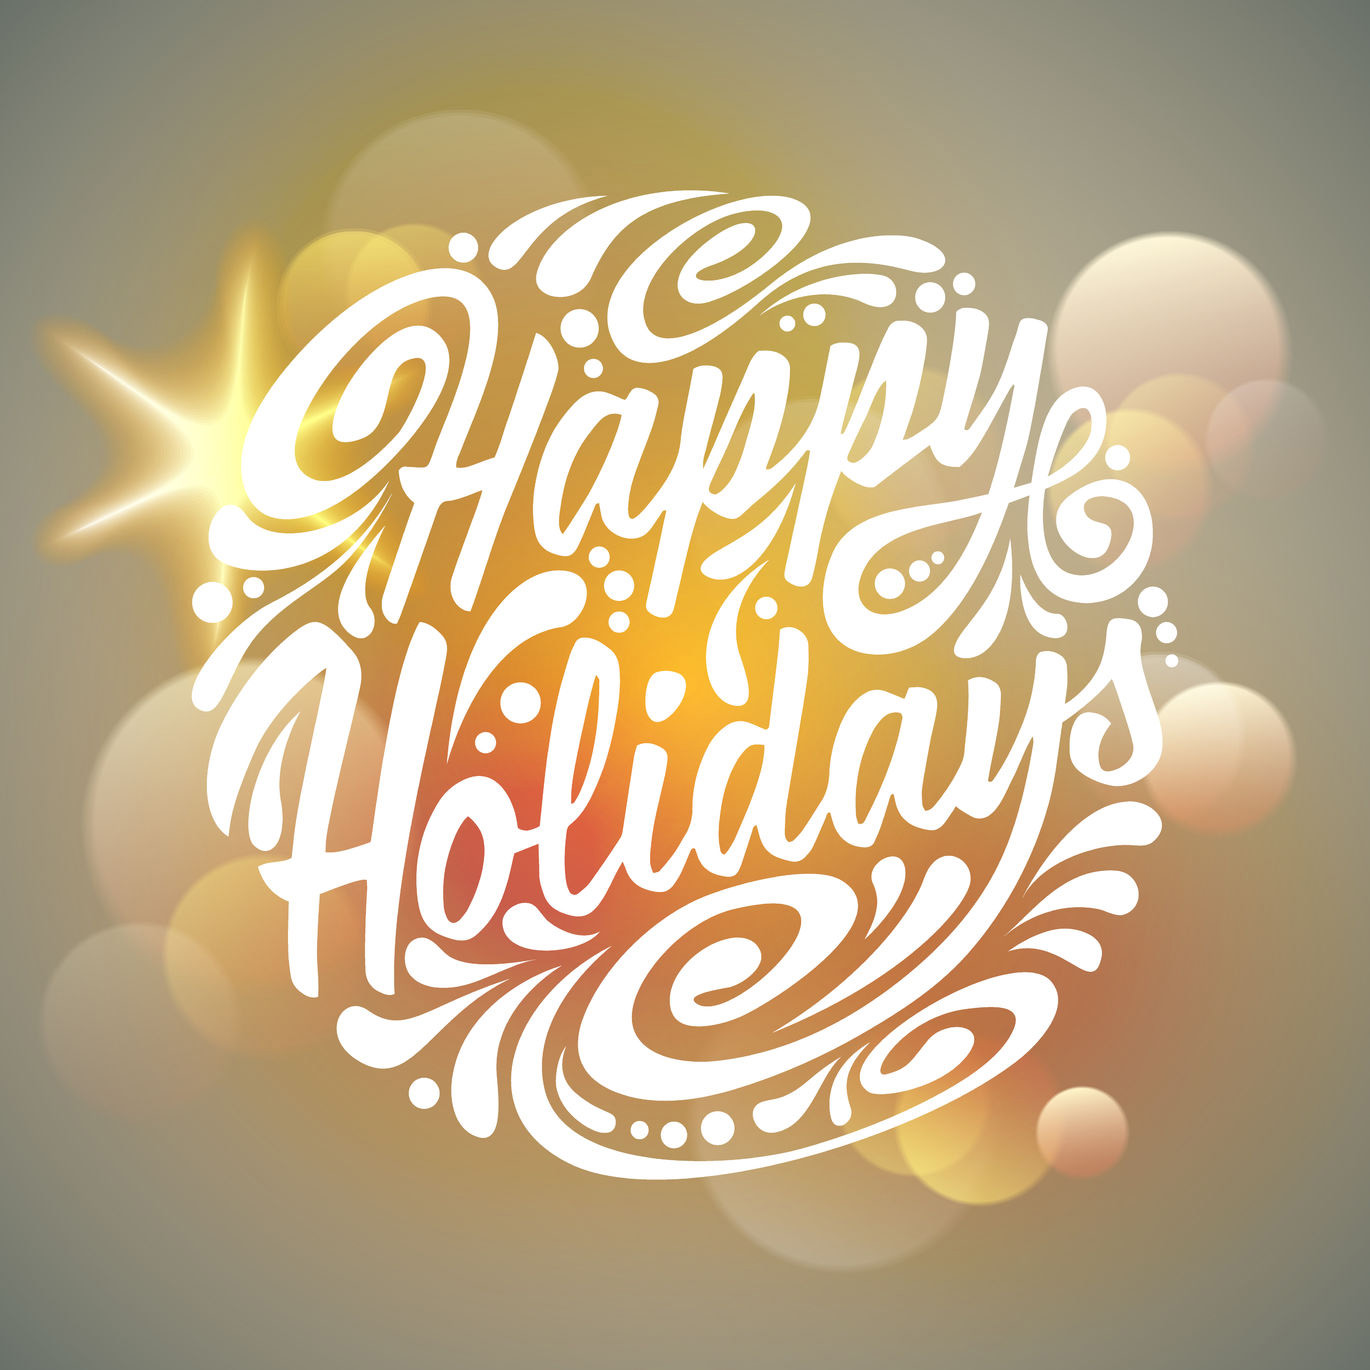 Happy Holidays from WVNET!